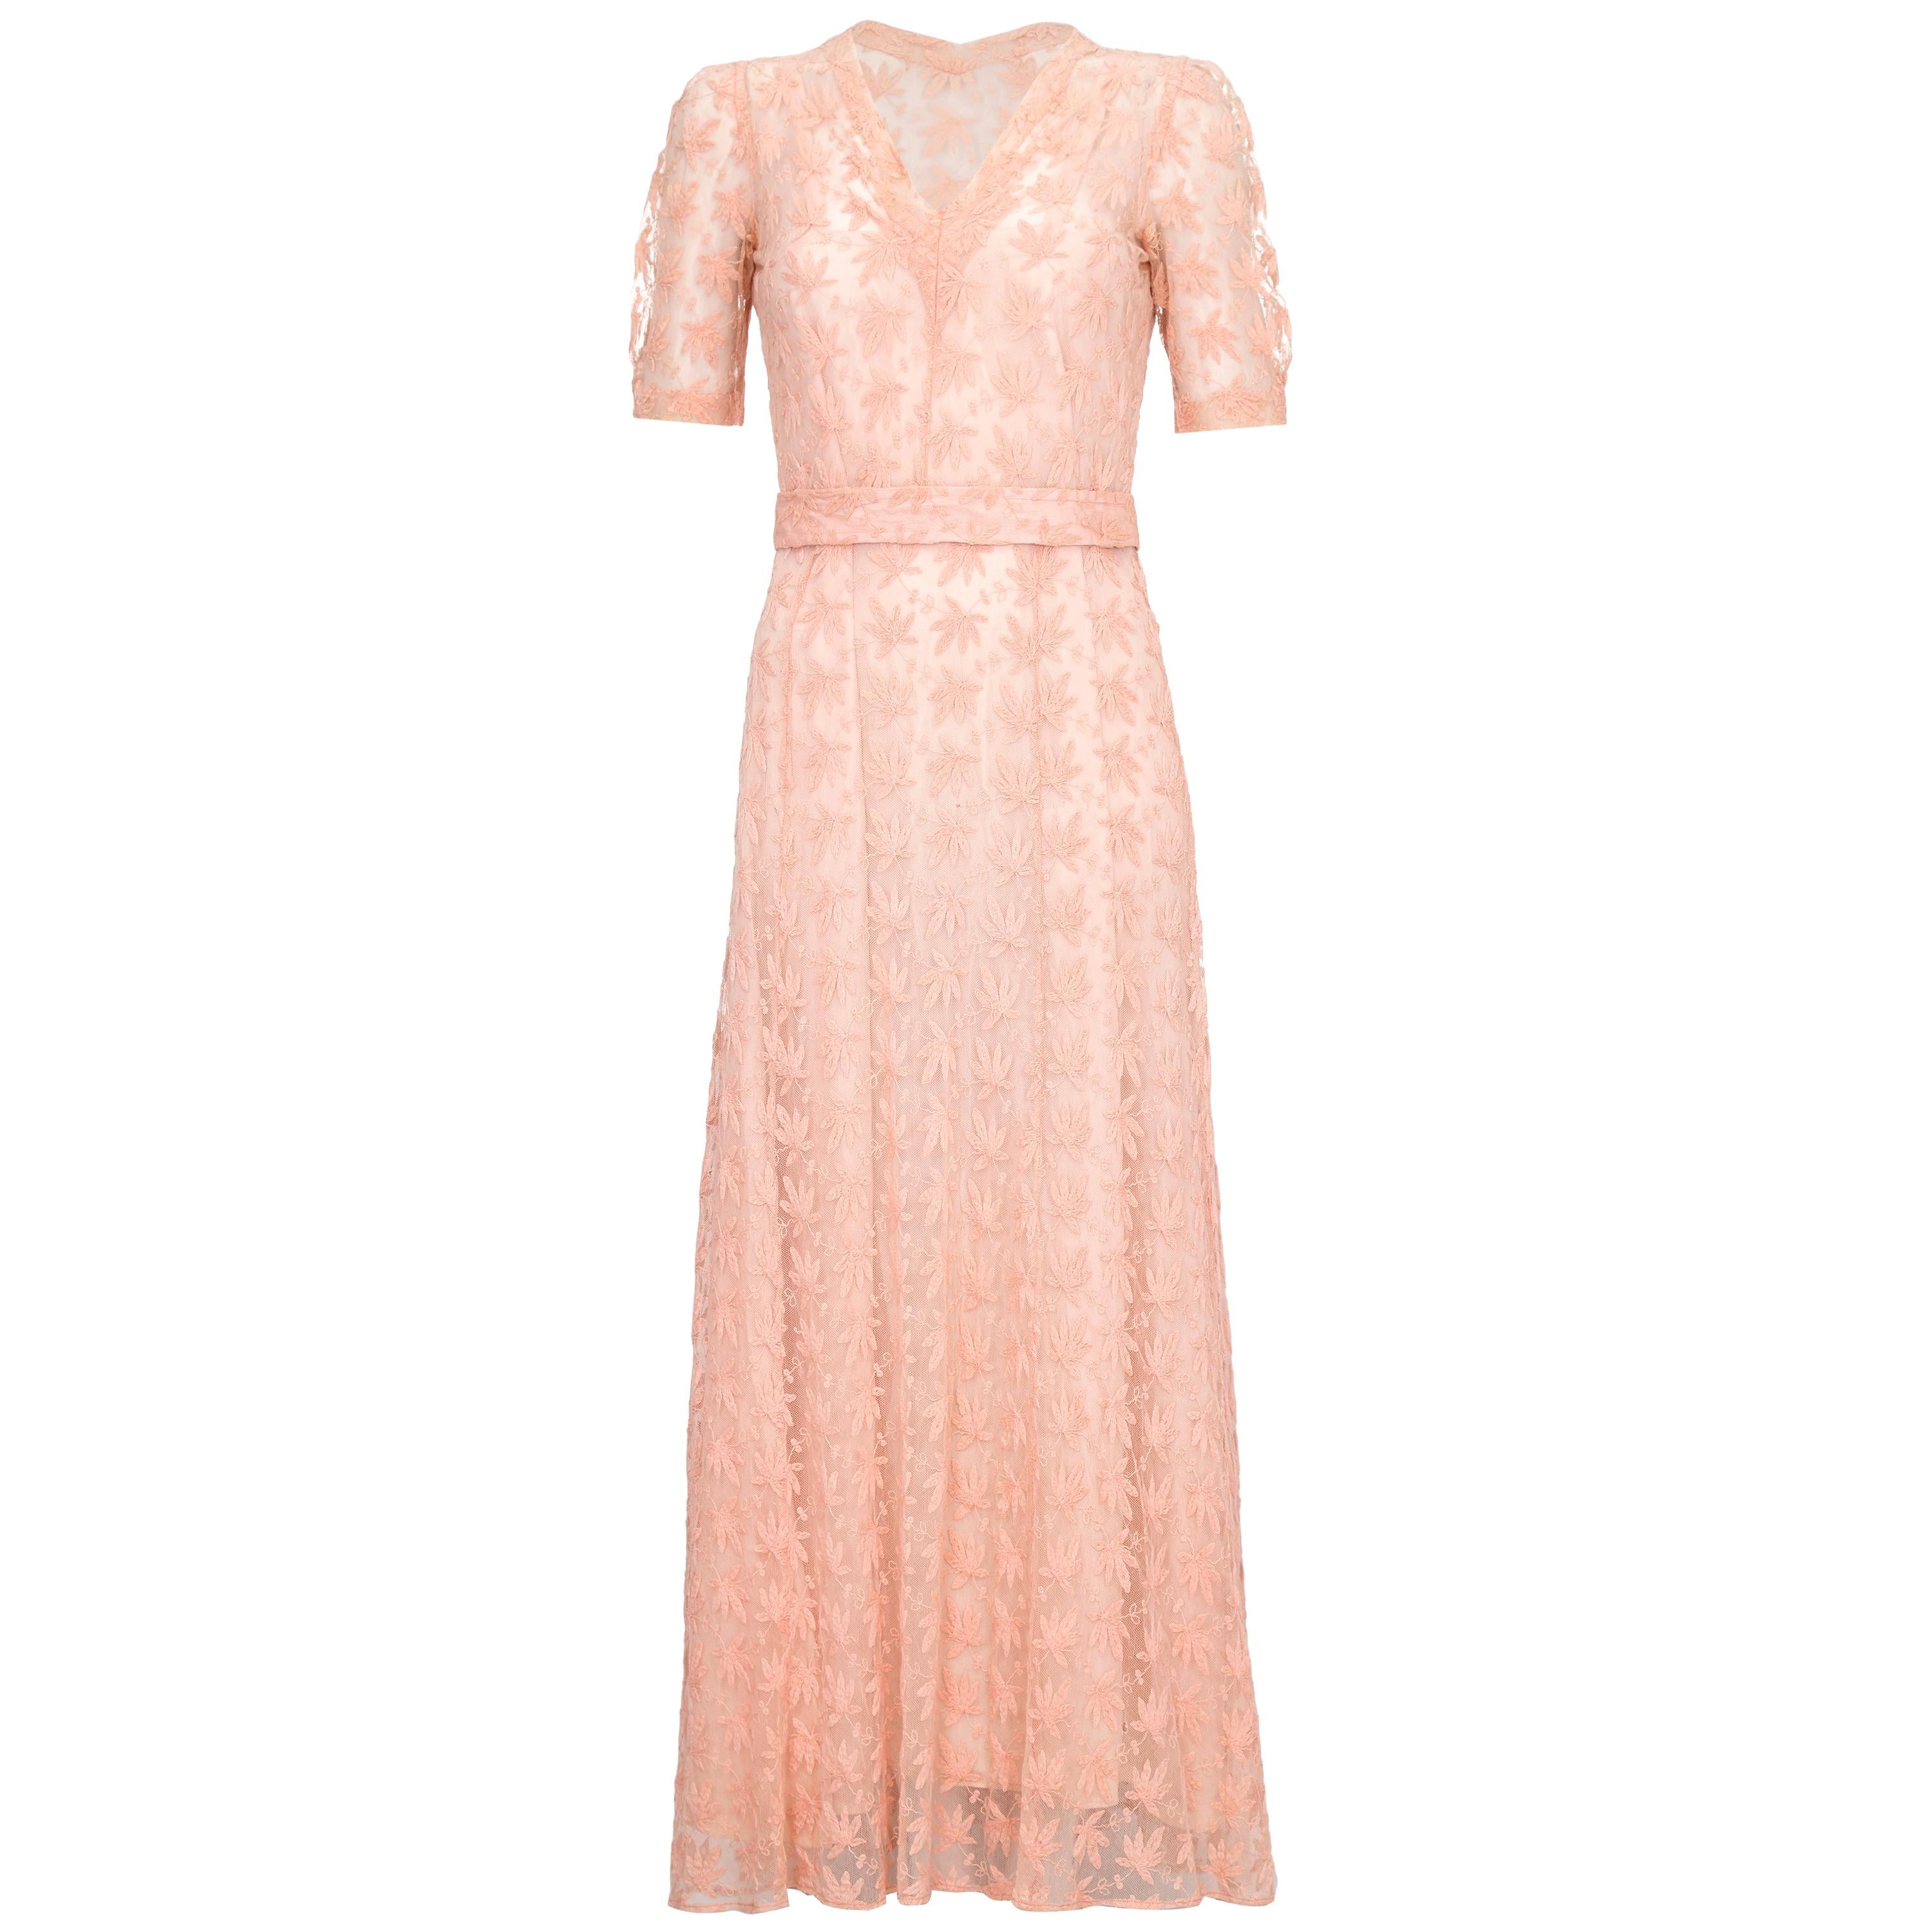 Beautiful 1930s Pale Pink Embroidered Lace Tea Gown Dress